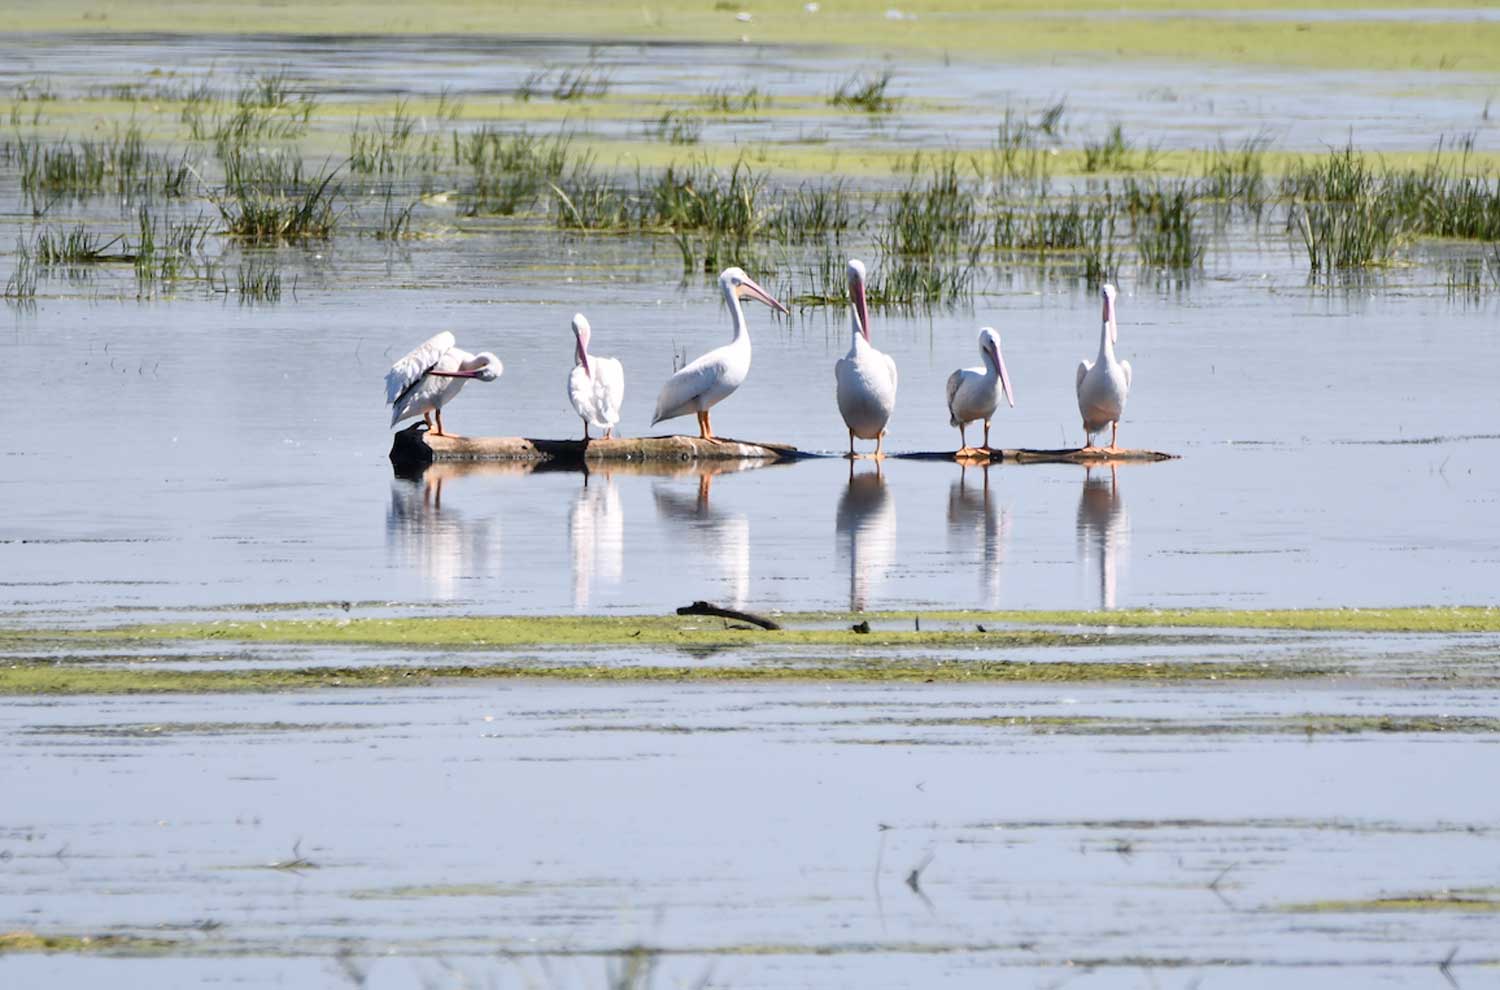 A group of six pelicans standing on a log in the water.